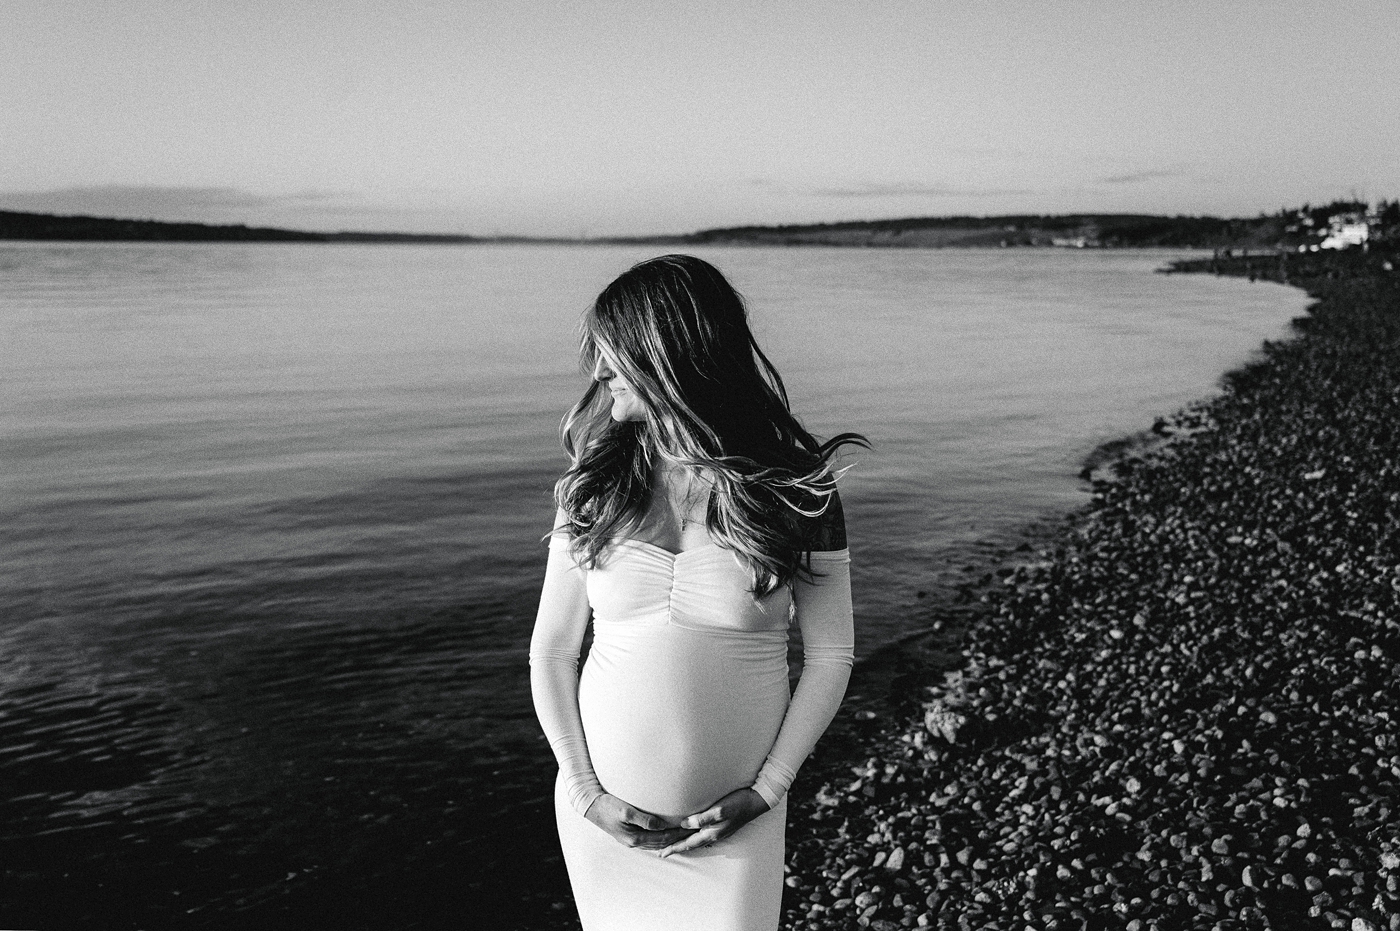 Mom-to-be stands near water's edge during maternity session. Image by PNW maternity photographer Meg Newton.